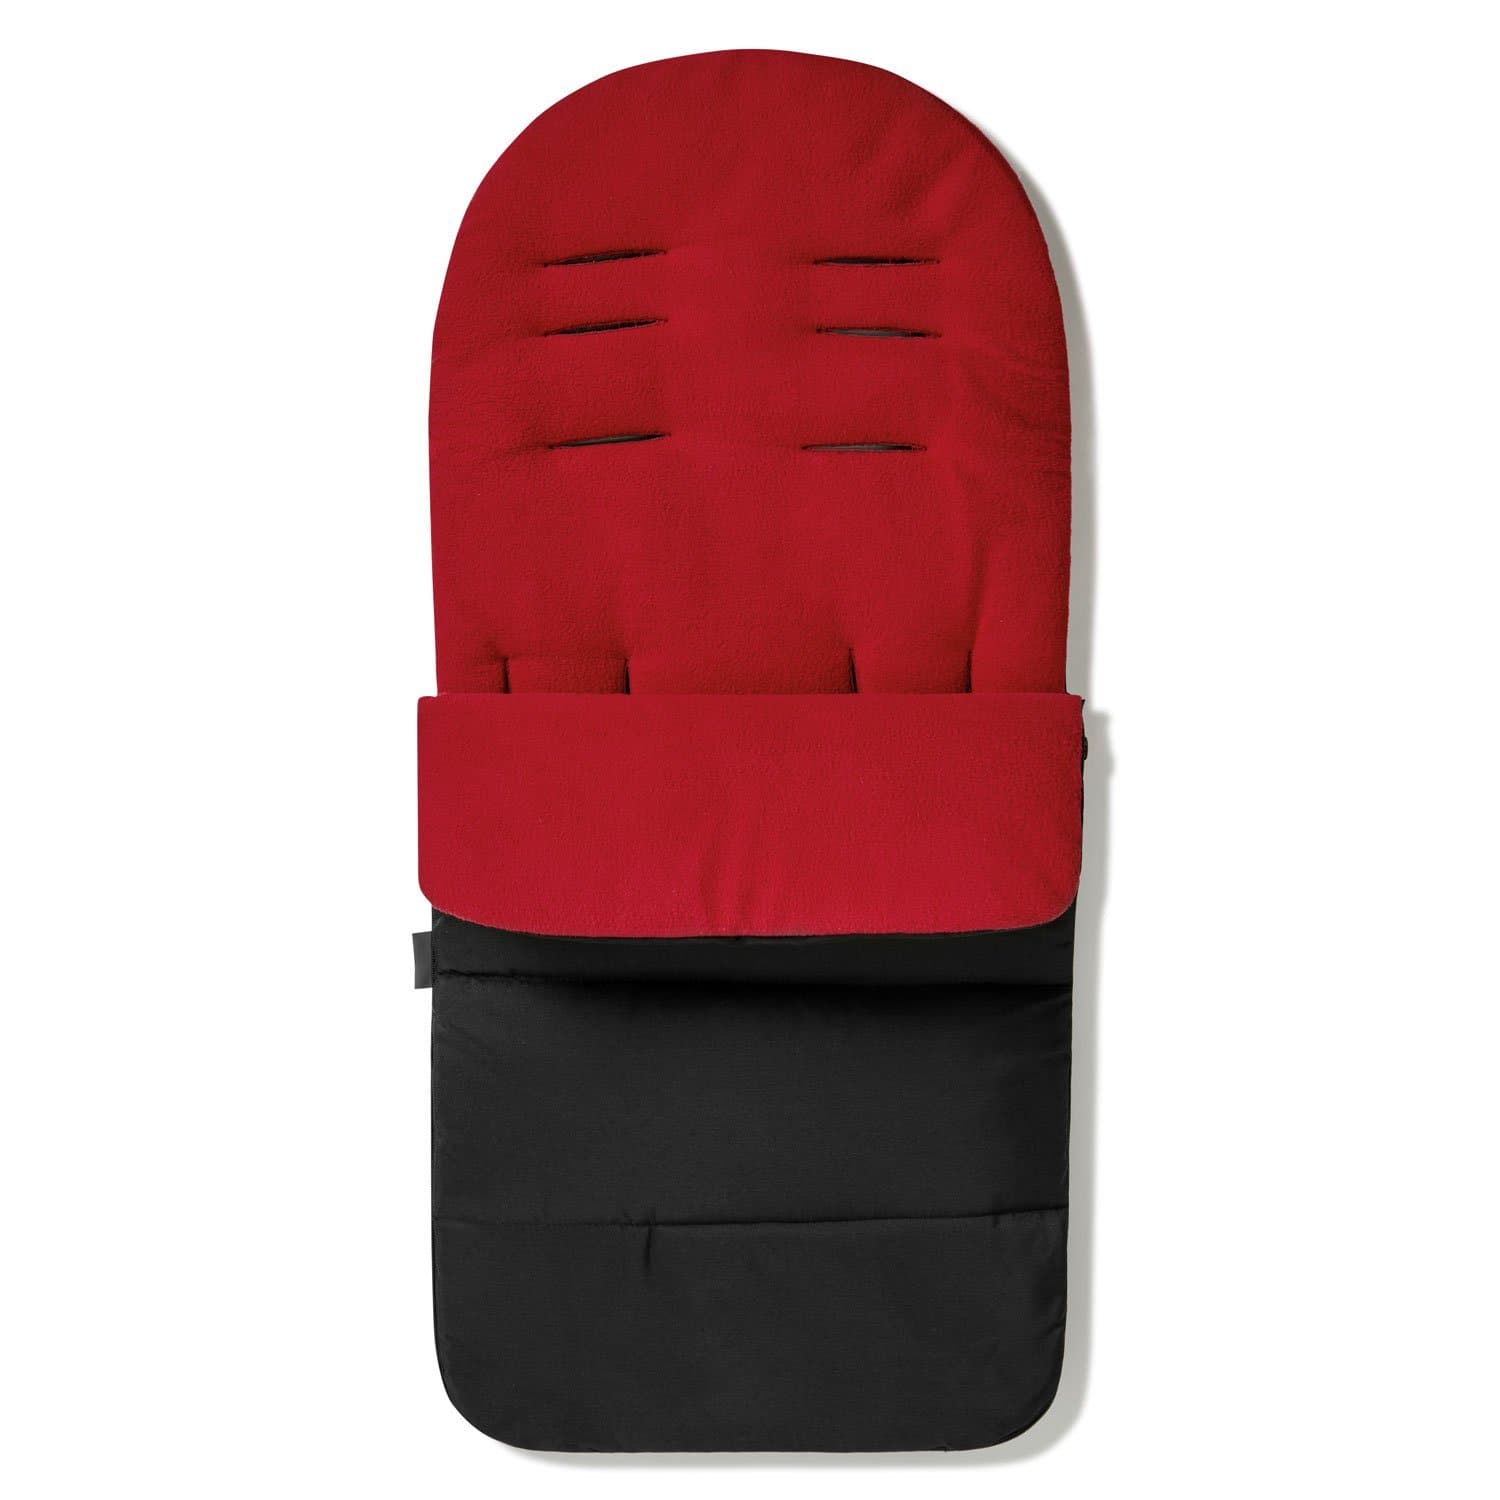 Premium Footmuff / Cosy Toes Compatible with Stokke - Fire Red / Fits All Models | For Your Little One